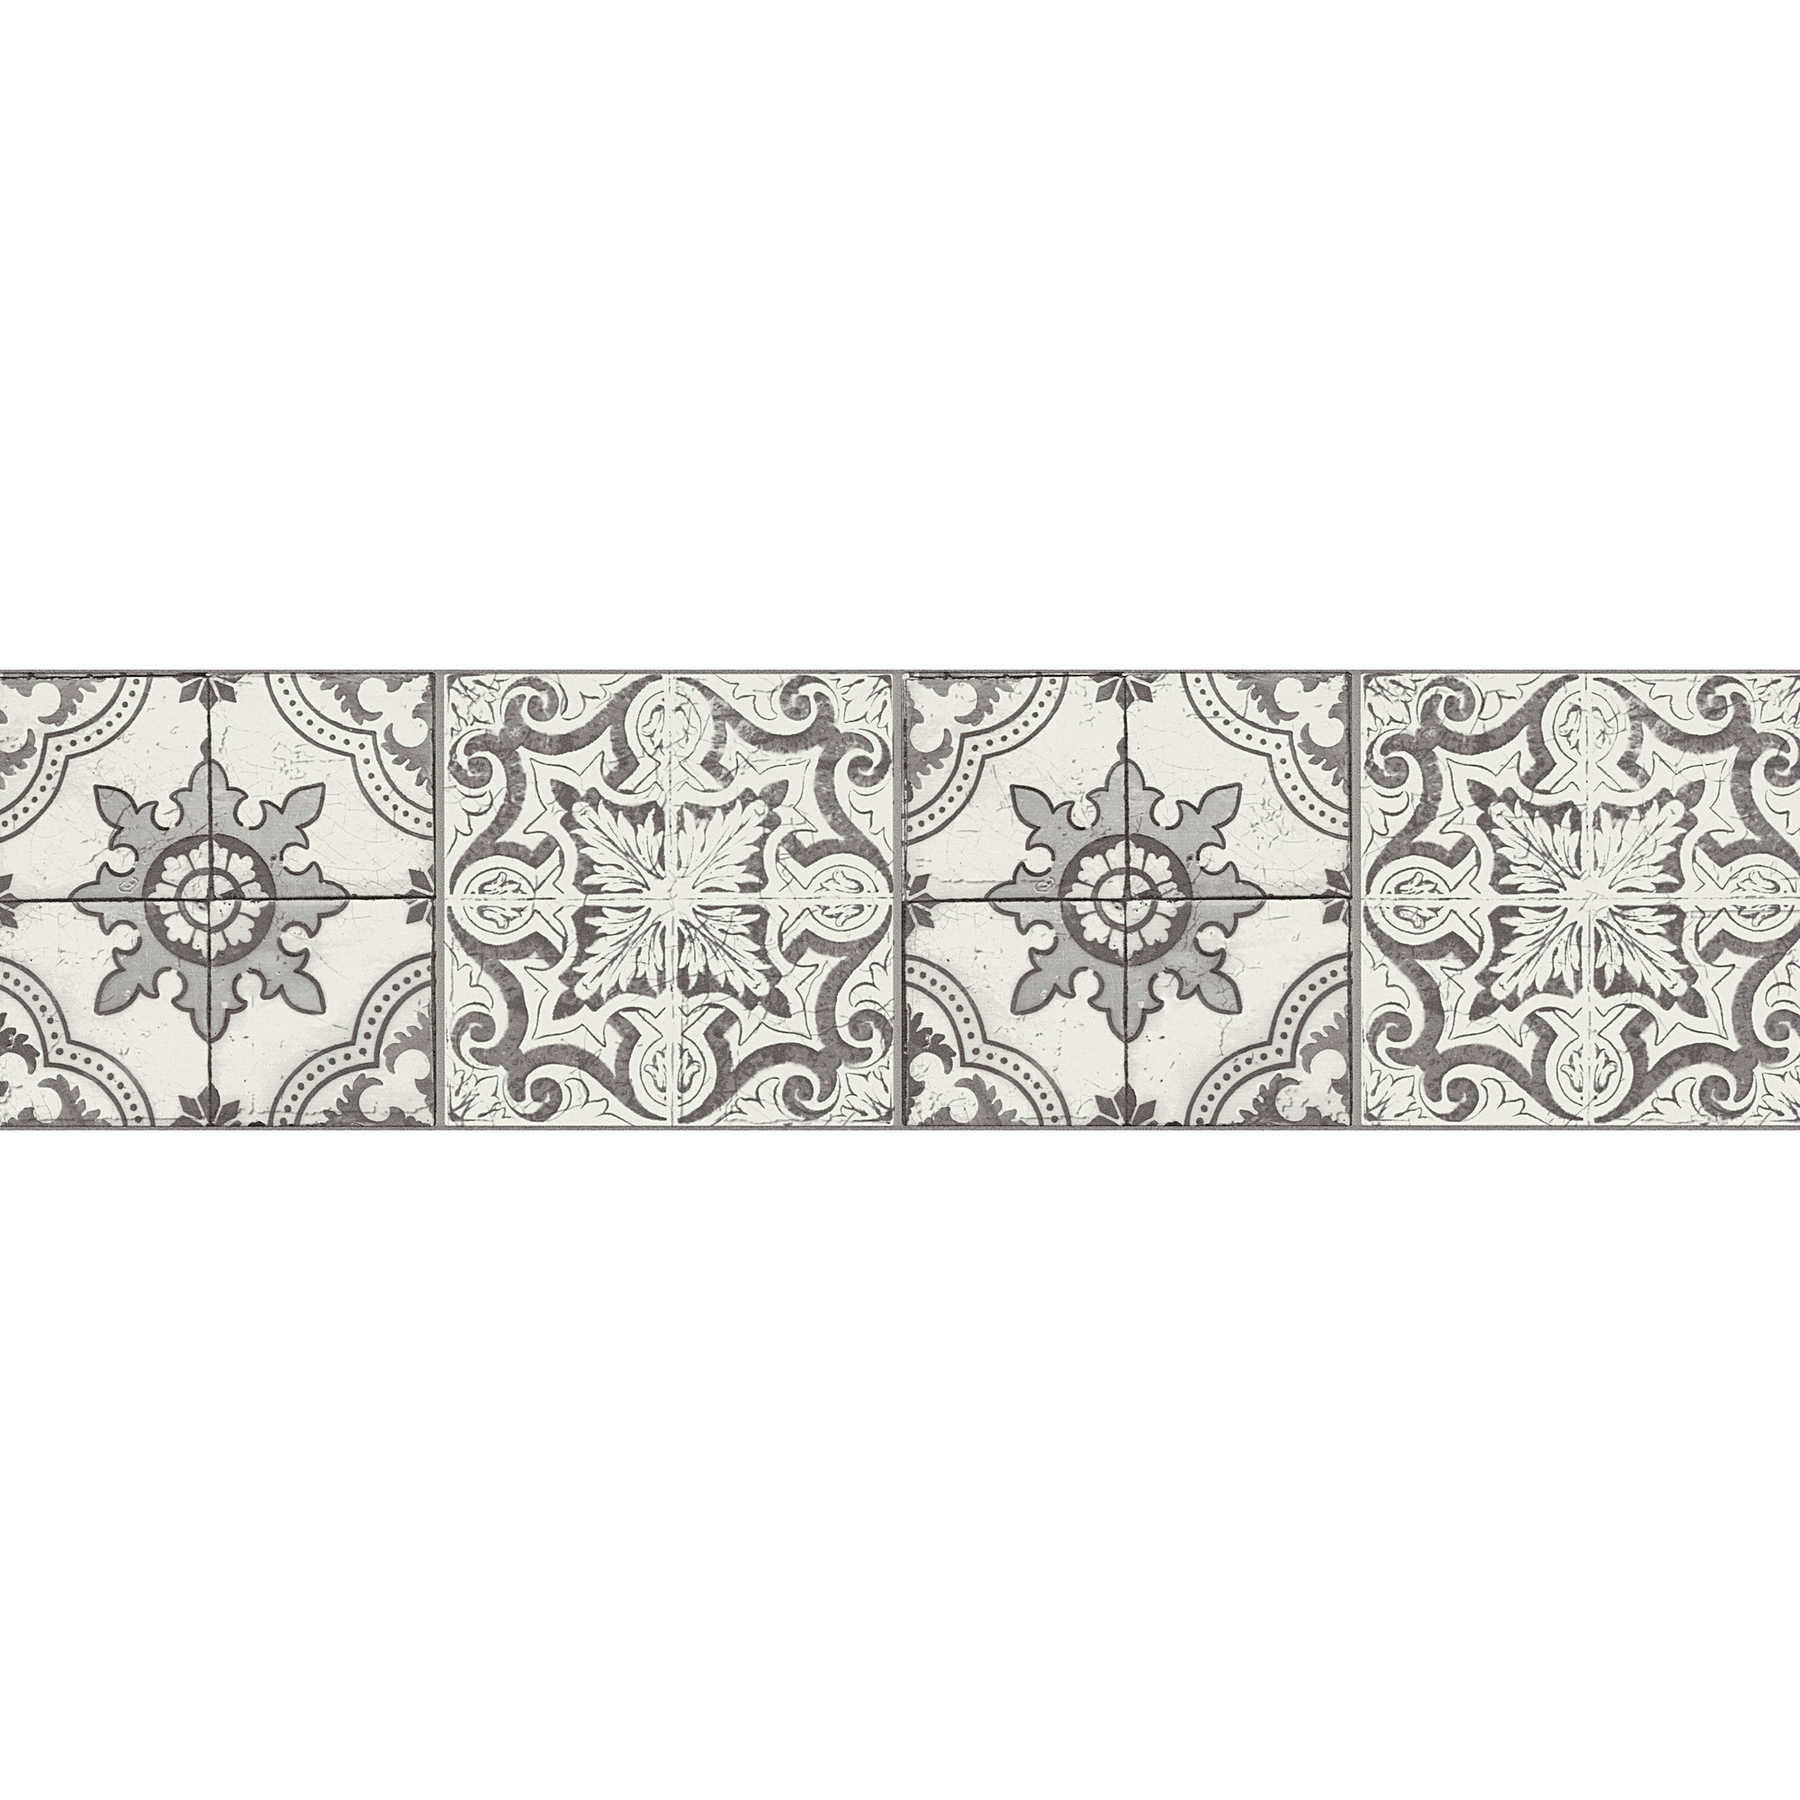         Wallpaper border tile look grey and white vintage style
    